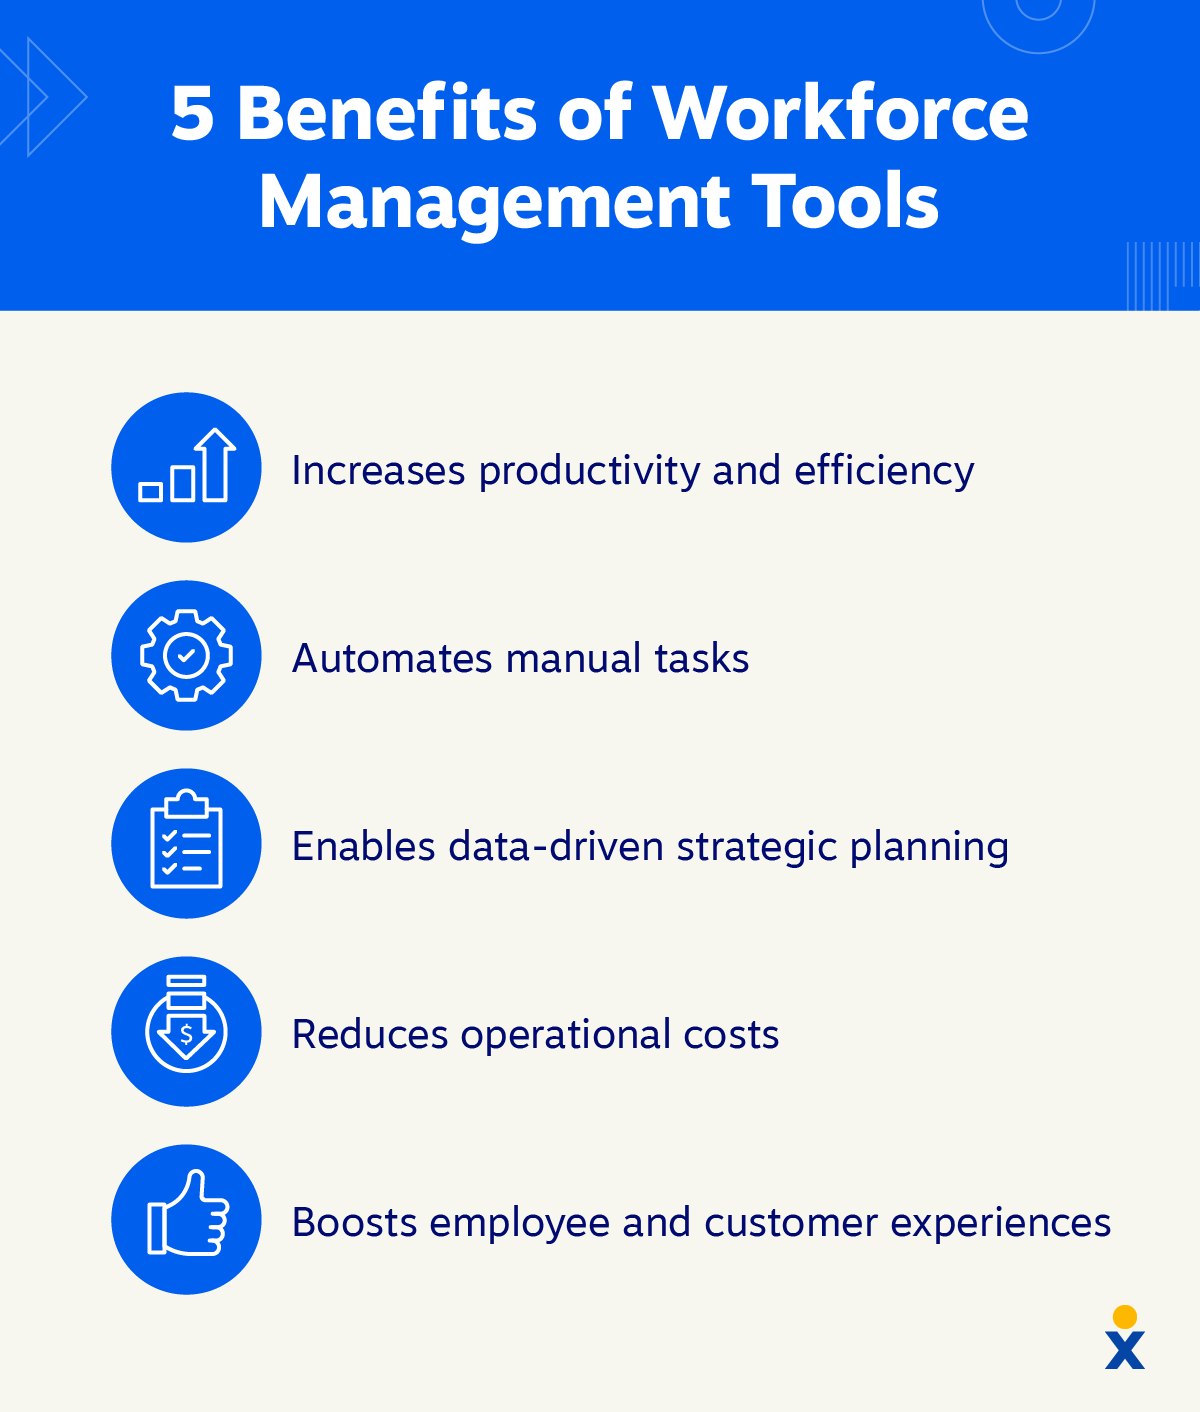 A list highlighted by icons shows the key benefits of workforce management software.